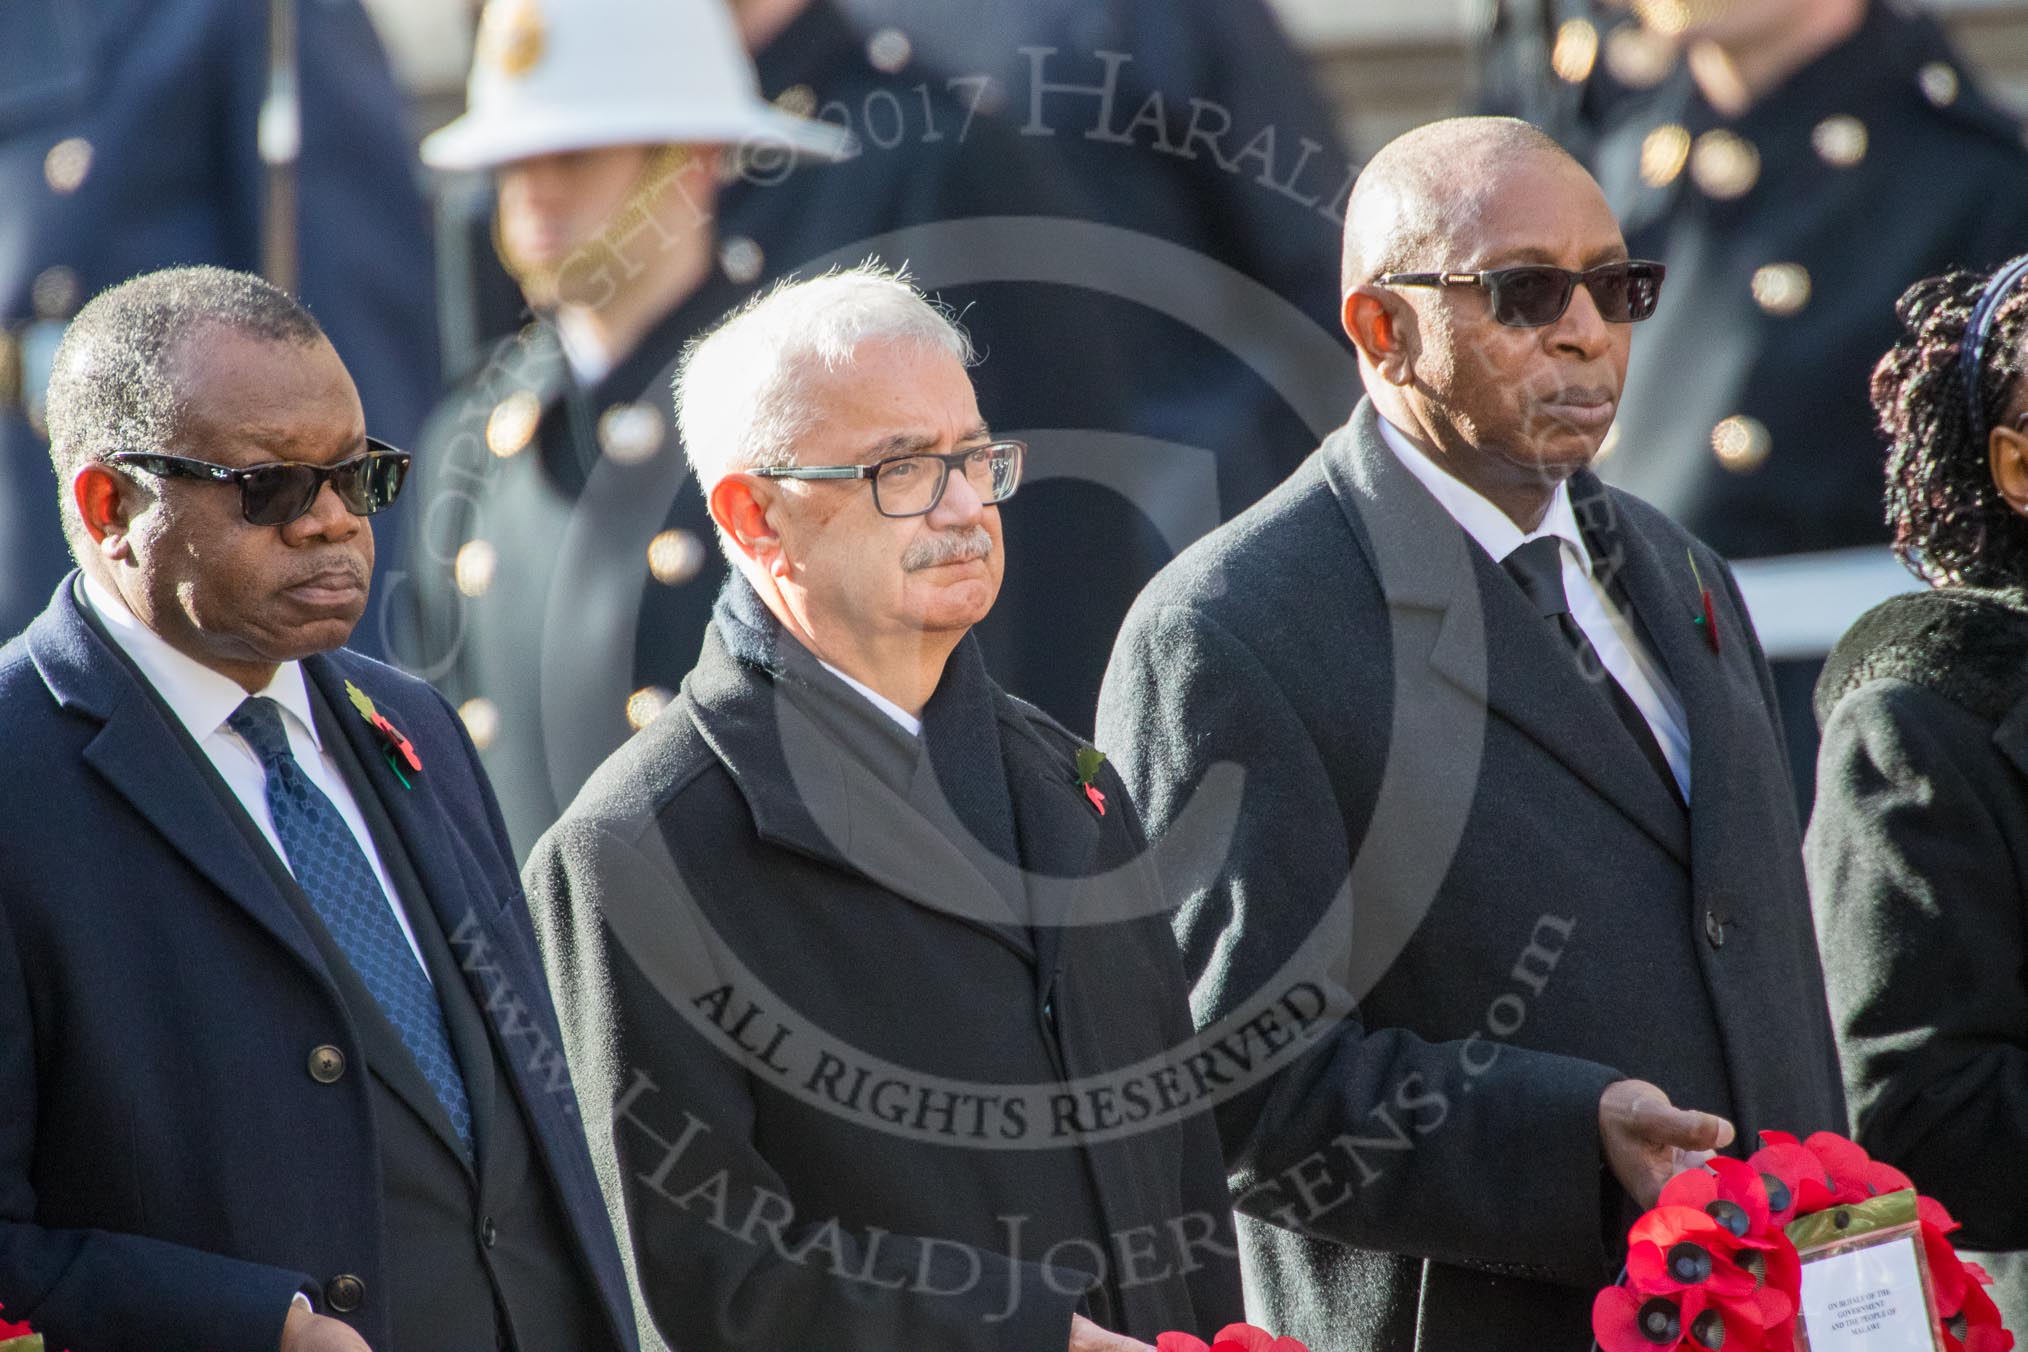 The High Commissioner of Zambia, Muyeba Shichapwa Chikonde, the High Commissioner of Malta, Joesph Cole, and the High Commissioner of Malawi, Kena A. Mphonda, during Remembrance Sunday Cenotaph Ceremony 2018 at Horse Guards Parade, Westminster, London, 11 November 2018, 11:04.